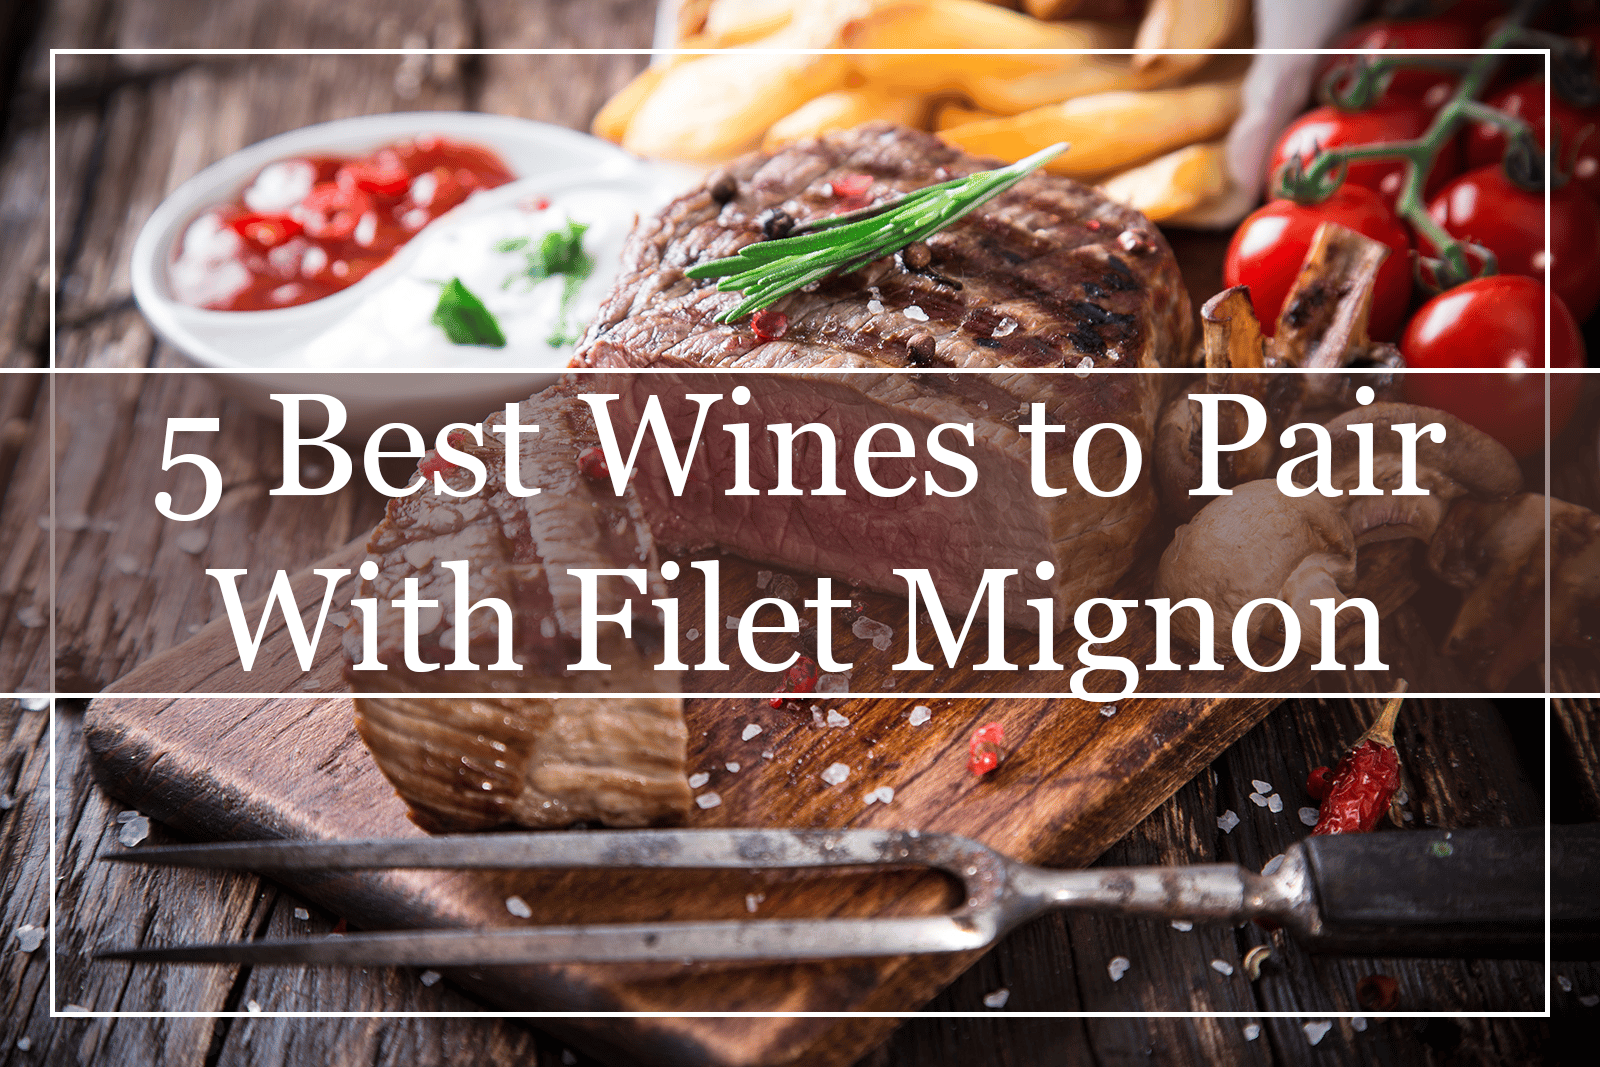 5 Best Wines to Pair With Filet Mignon (2022)